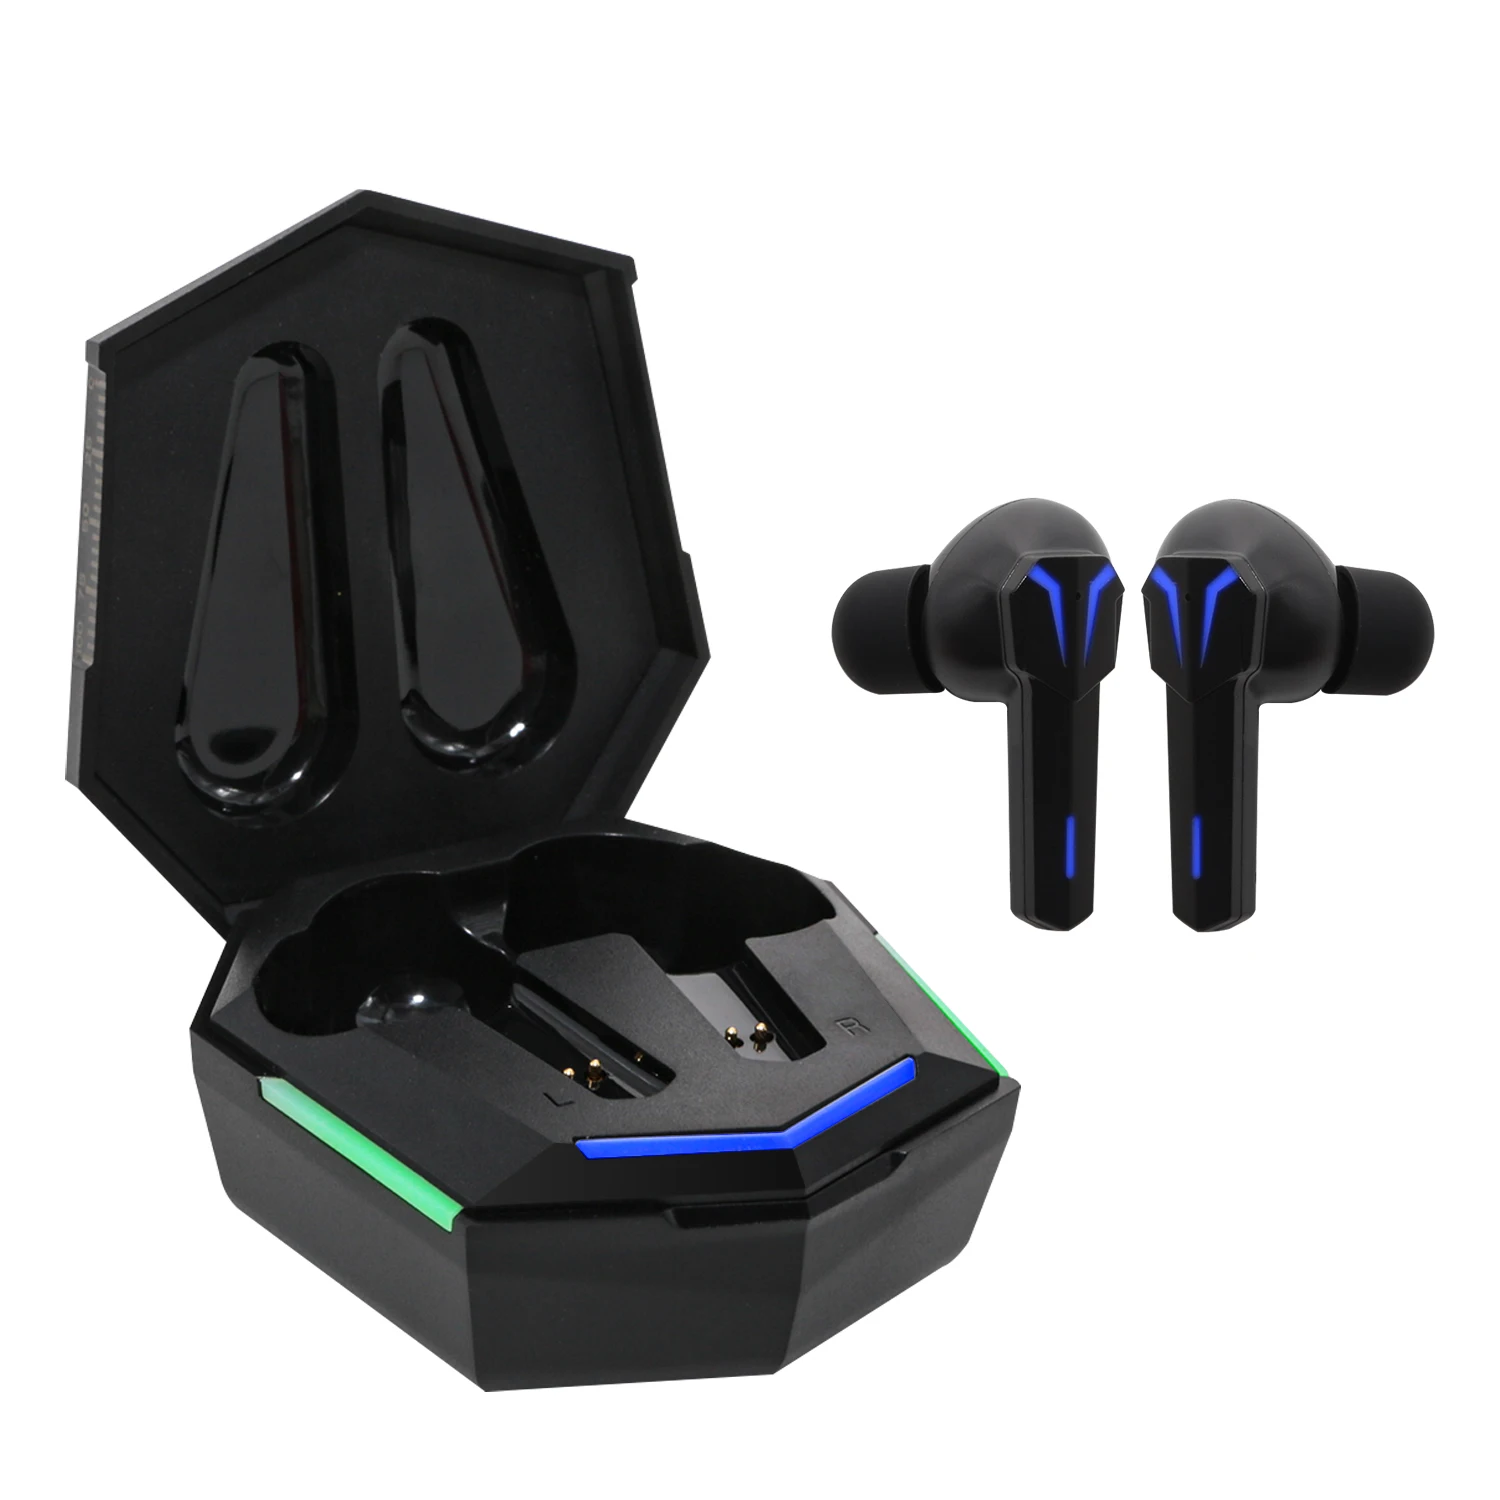 KINSGTAR Gaming Sport TWS Earphones LED Display Mini BT Headsets Wireless Earbuds With LED Charging Case